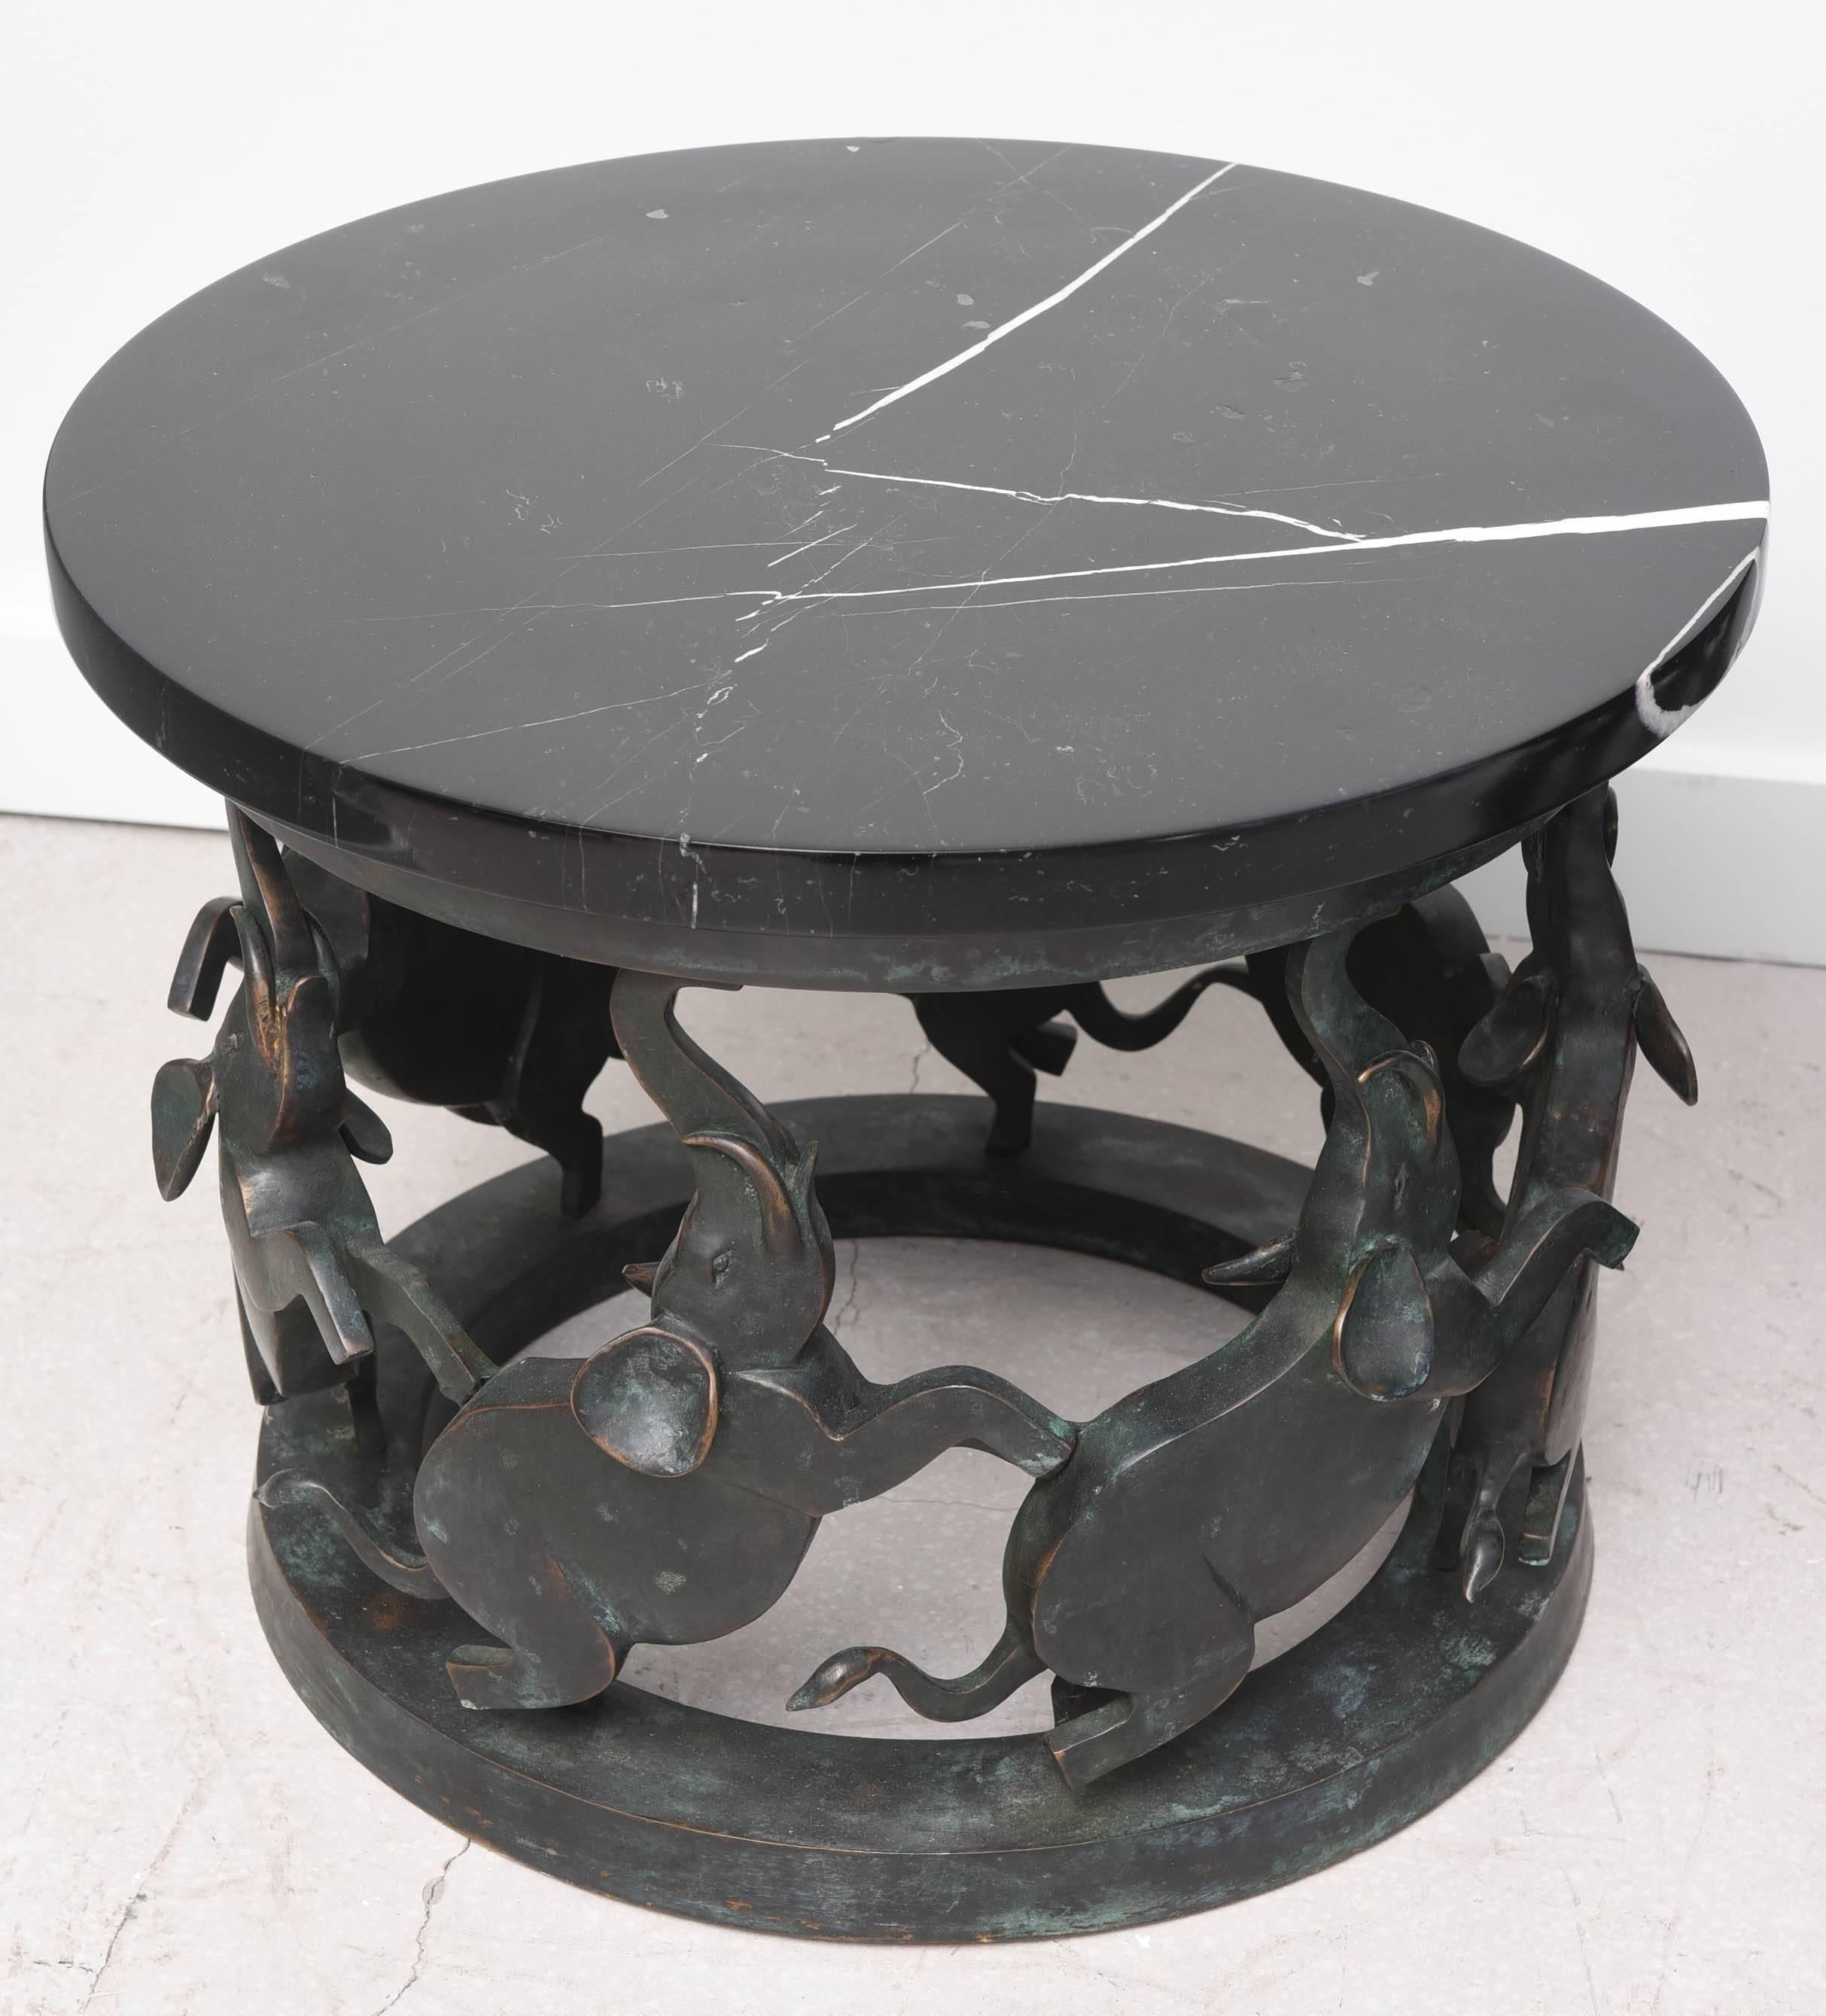 Pair of heavy bronze side tables with stylized elephant motif. The black marble tops are original and removable.